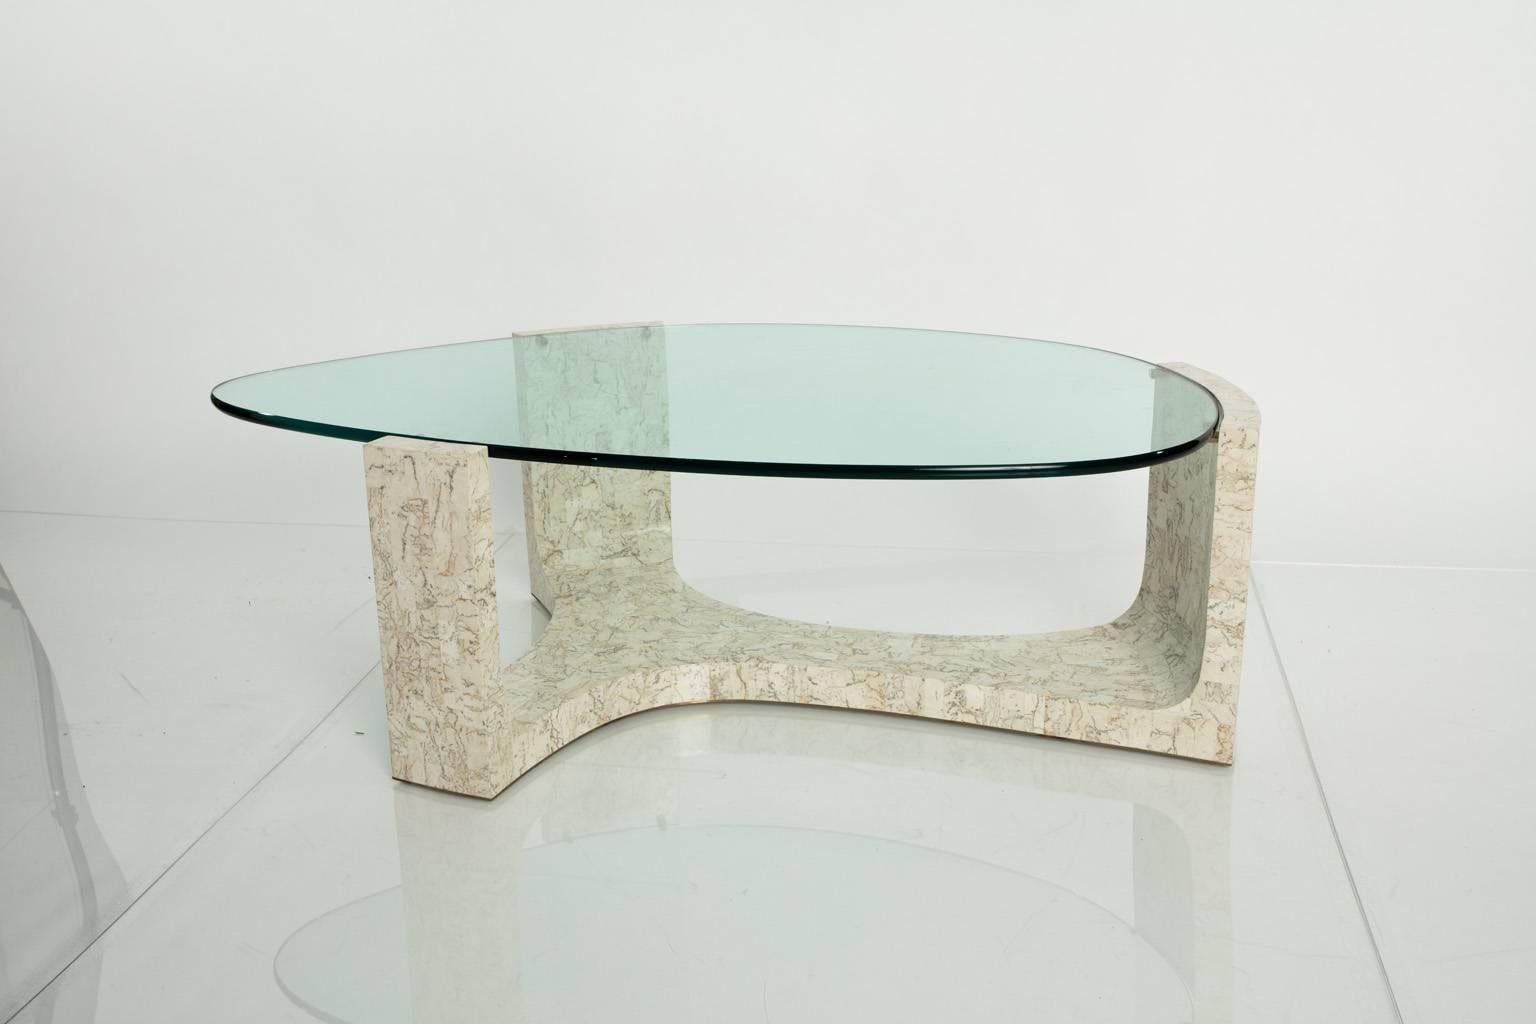 Kidney shaped, three prong coffee table with a glass top.